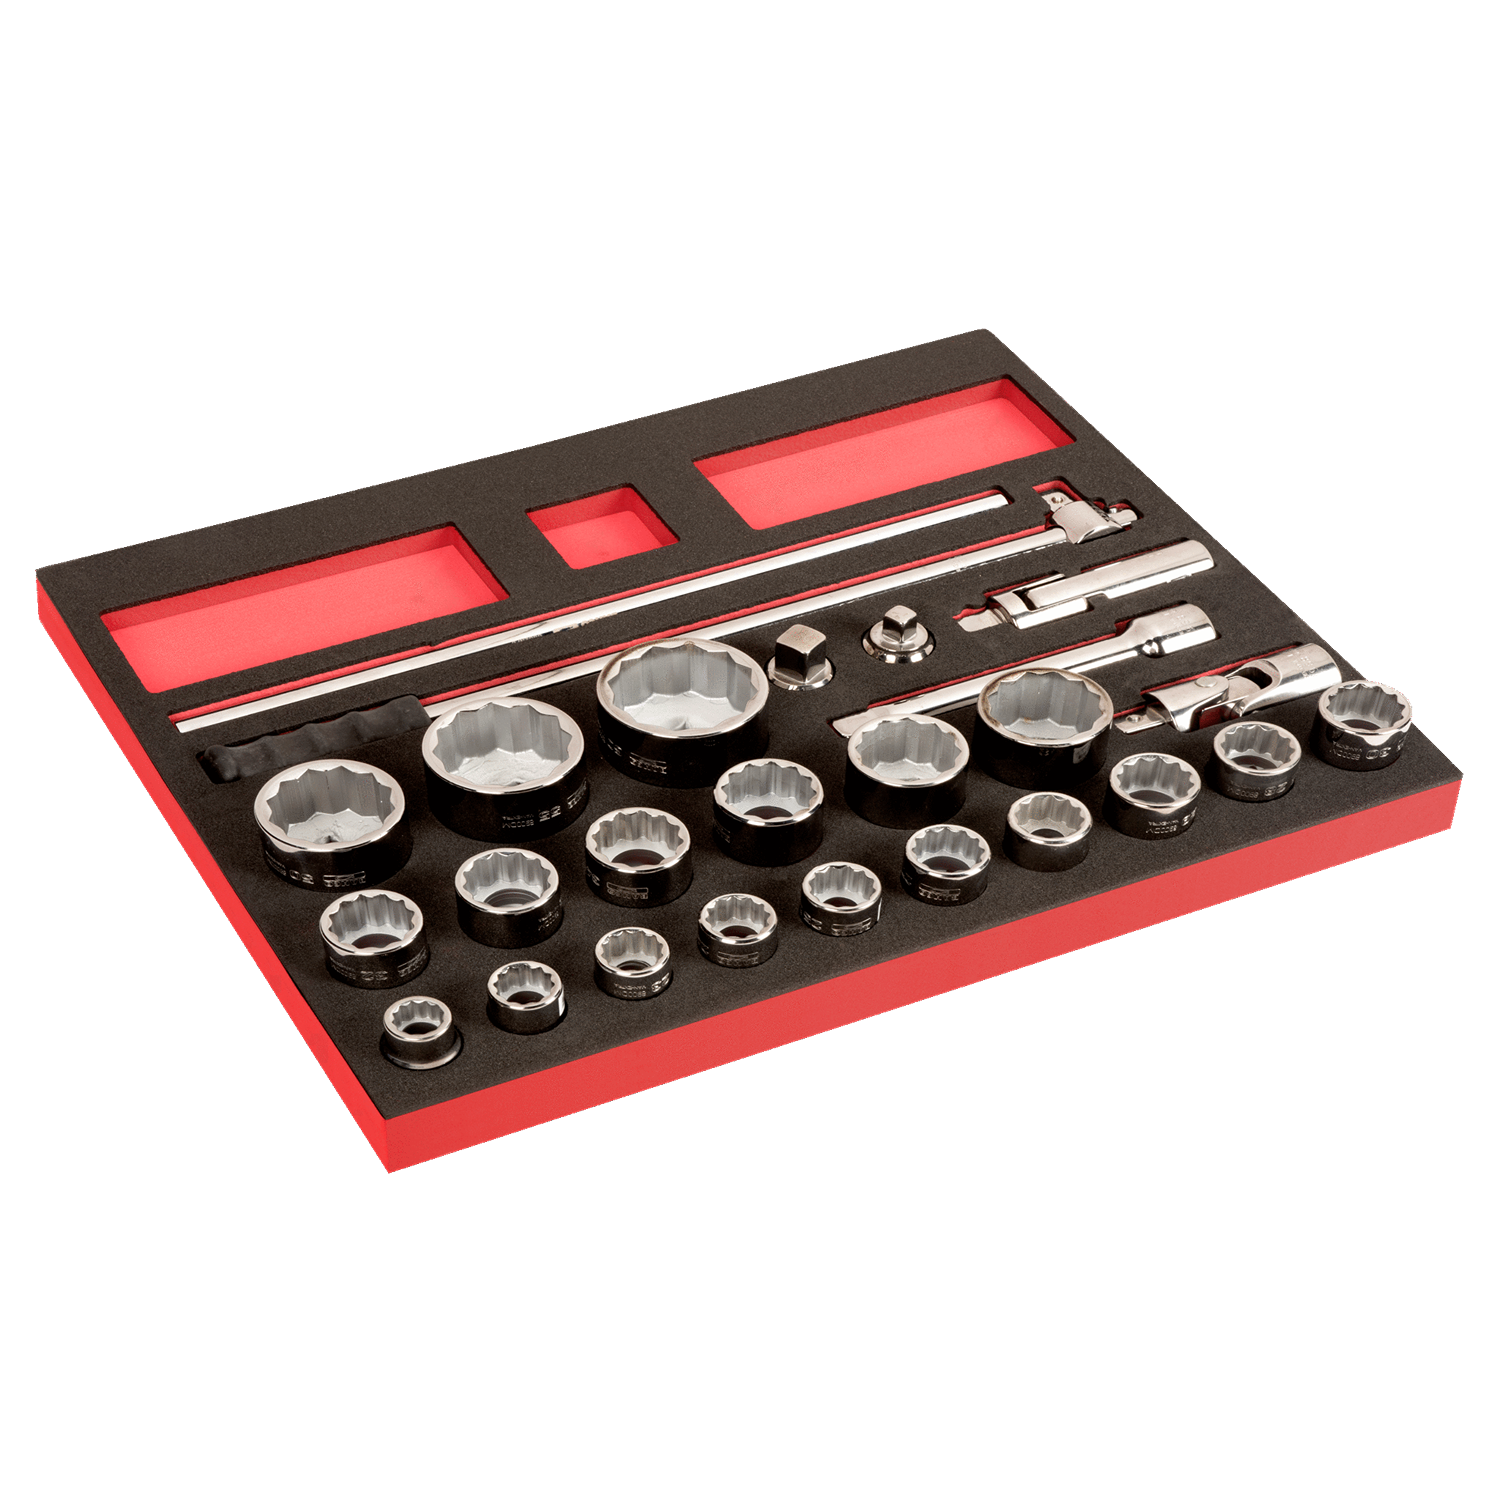 BAHCO FF1A2301 Fit&Go 3/3 Foam Inlay 3/4” Socket Set - 26 Pcs - Premium SOCKET SET from BAHCO - Shop now at Yew Aik.